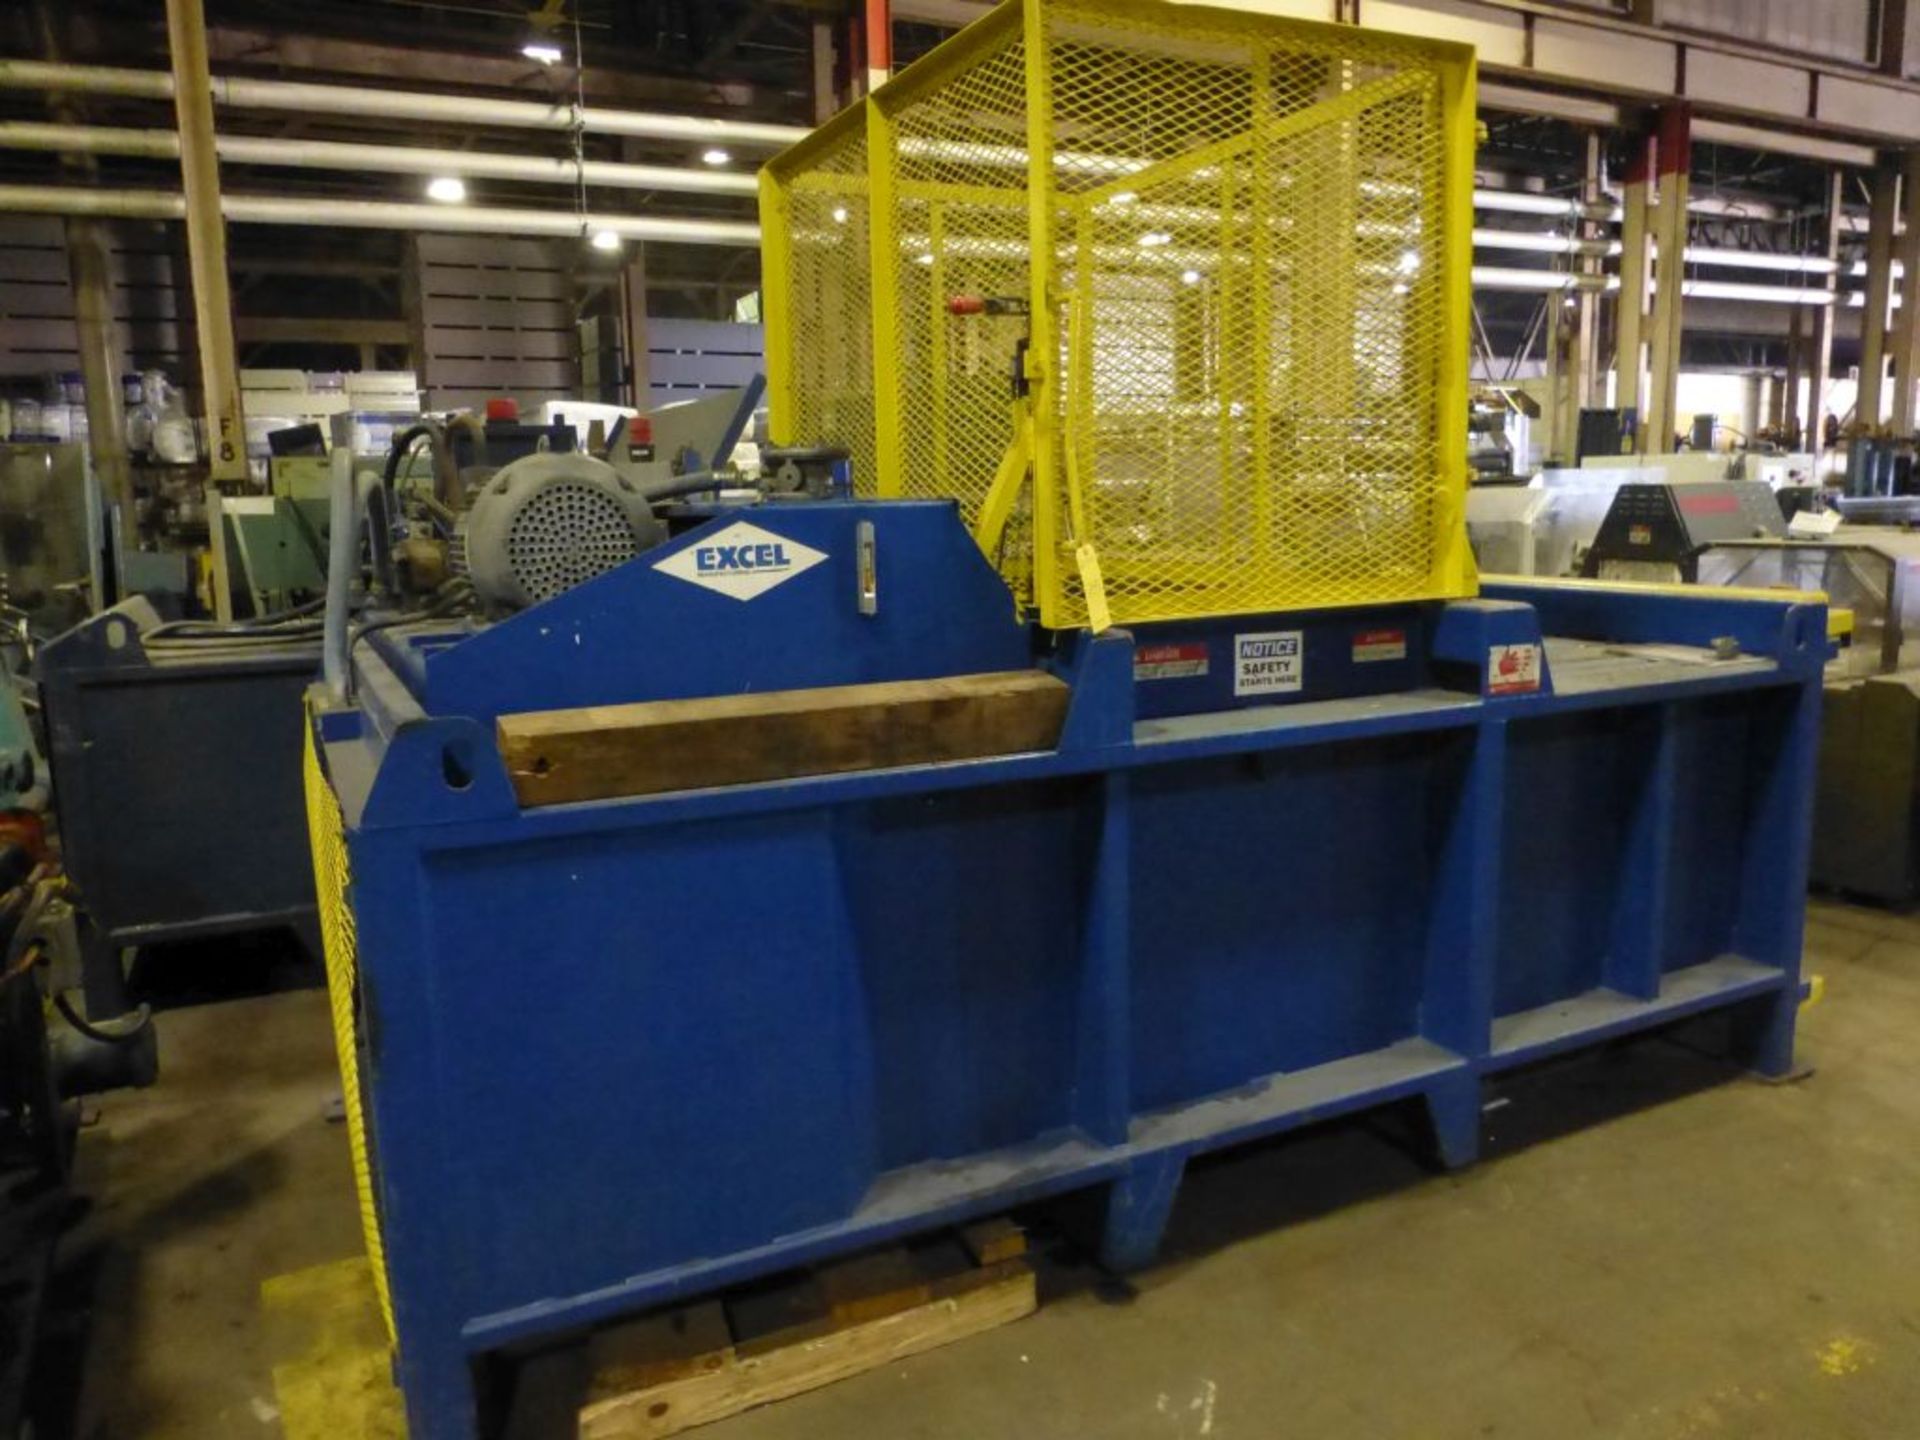 Excel Compactor/Baler | Model No. EX-60; Cylinder: 2 - 6" Bore, 54" Stroke; Feed Opening: 54"W x